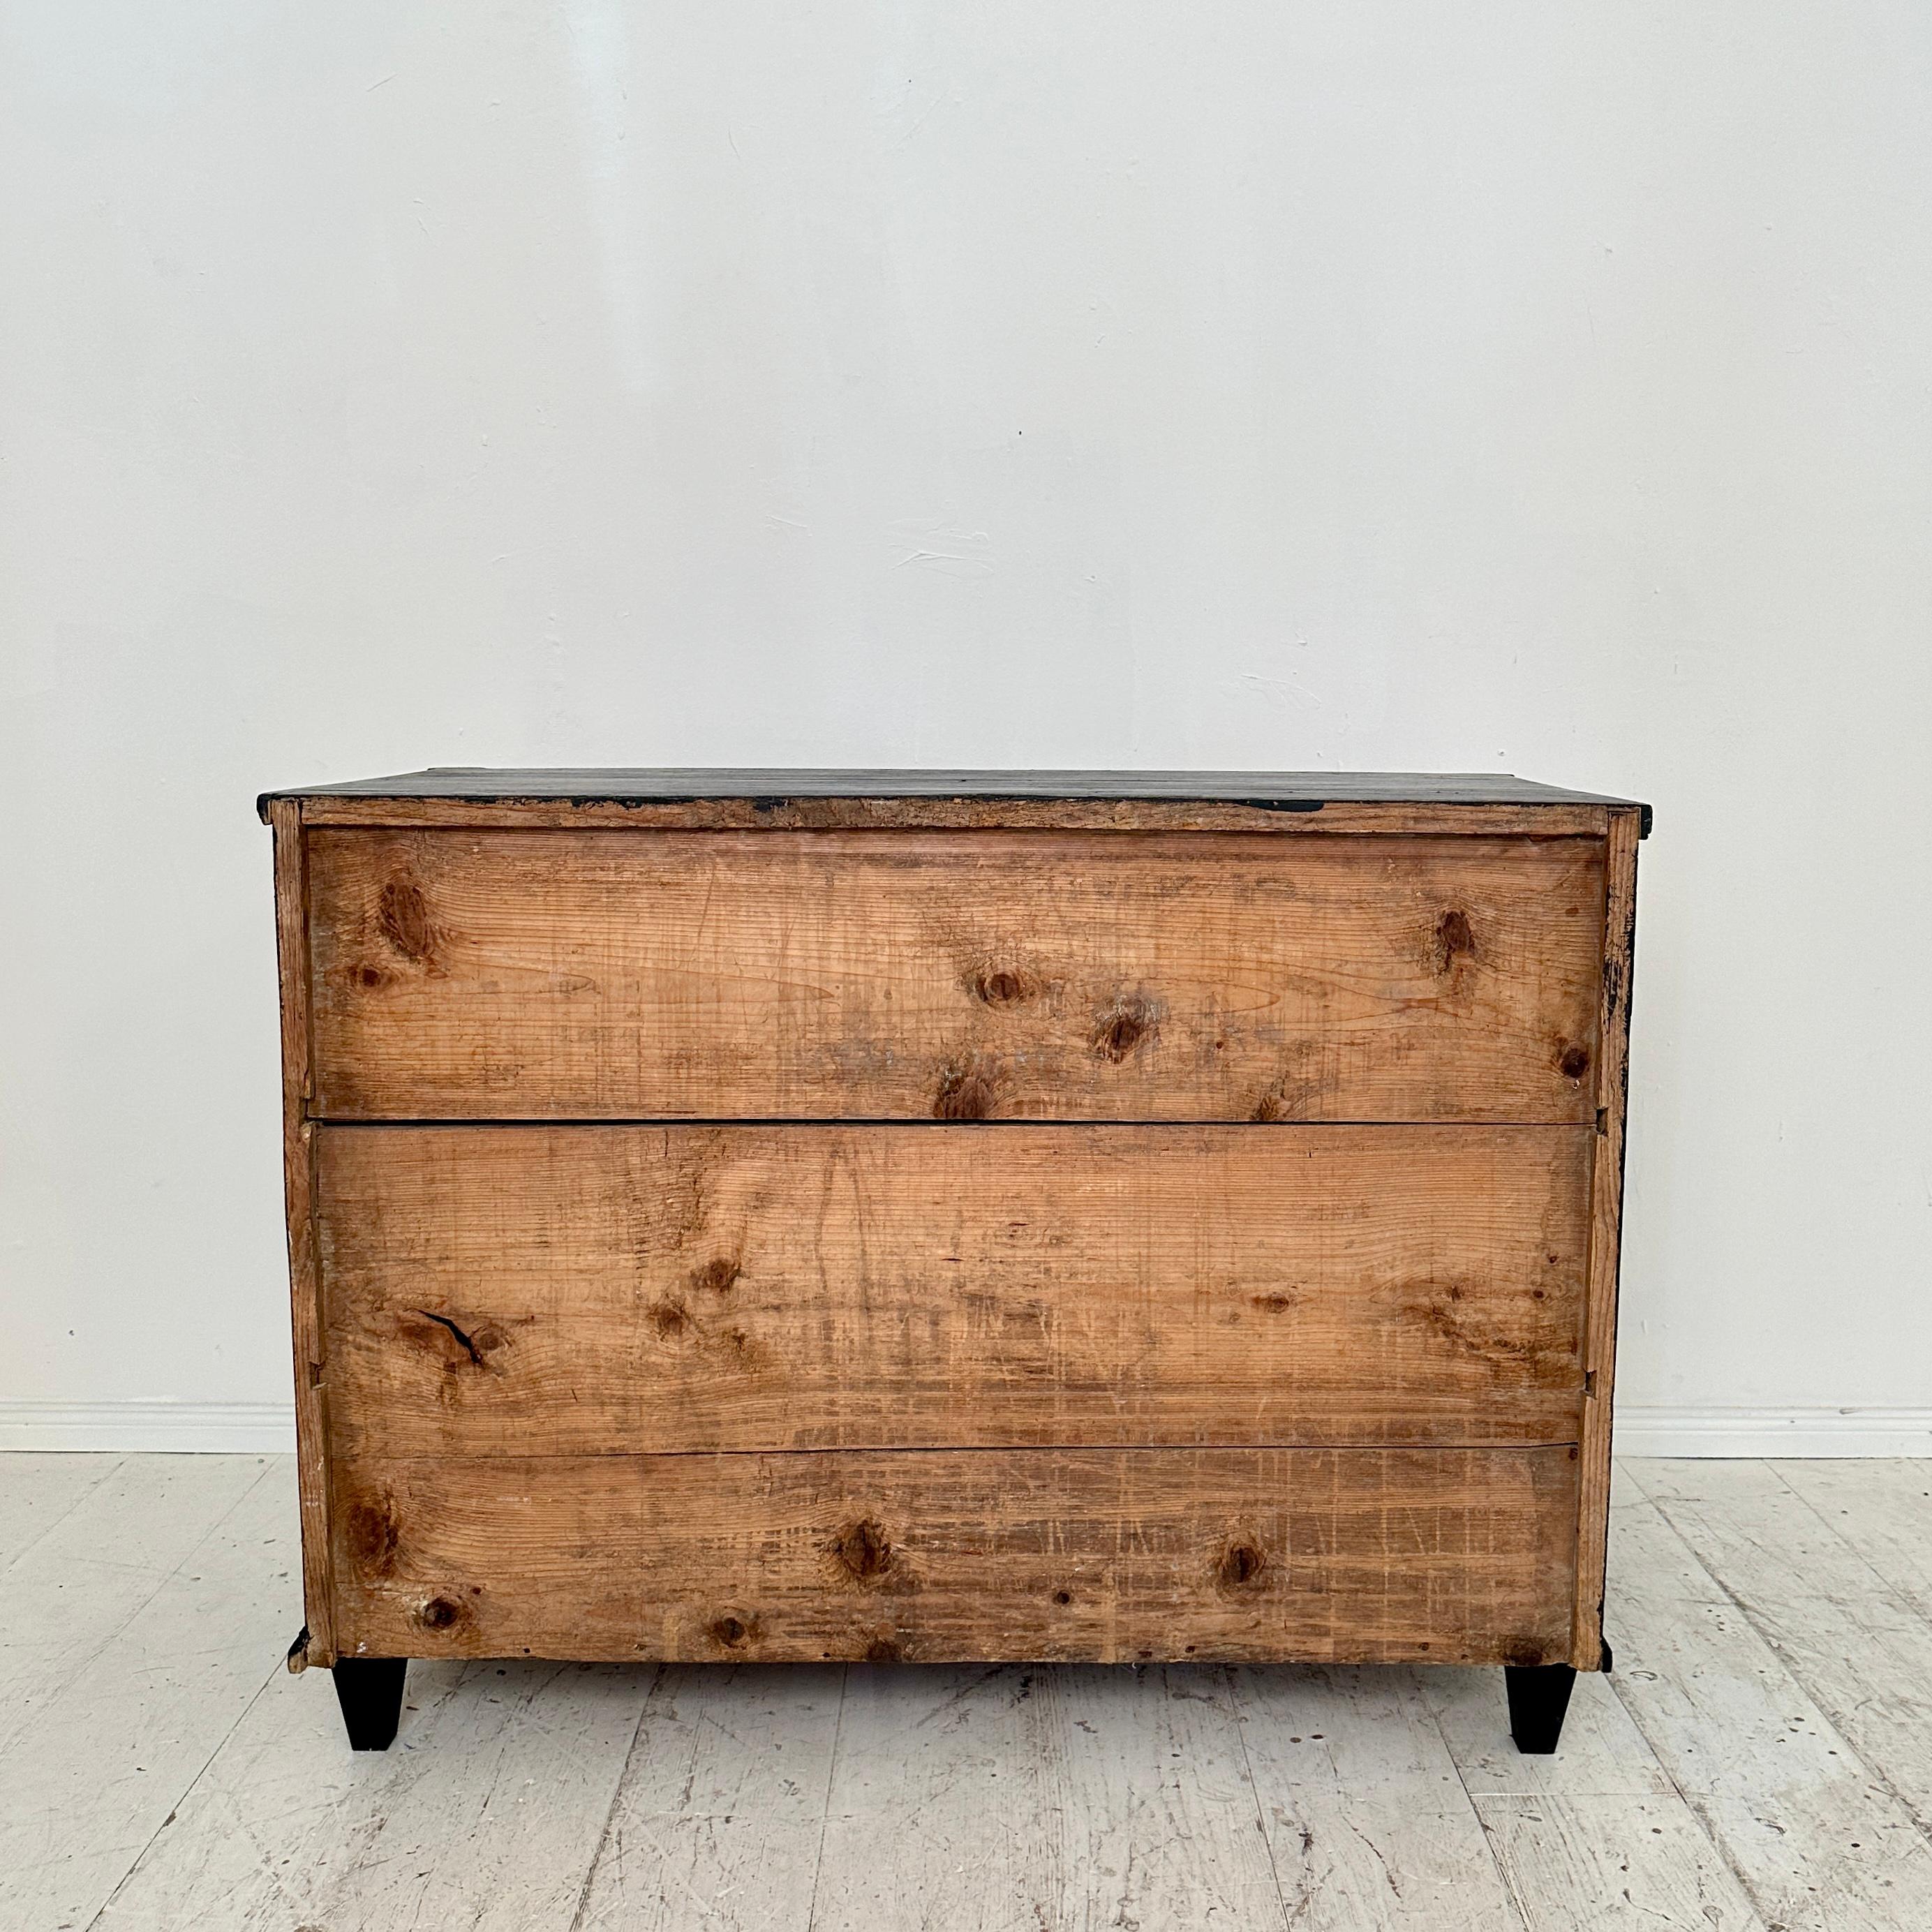 Early 19th Century Black Empire Chest of Drawers with 3 Drawers, around 1800 For Sale 4